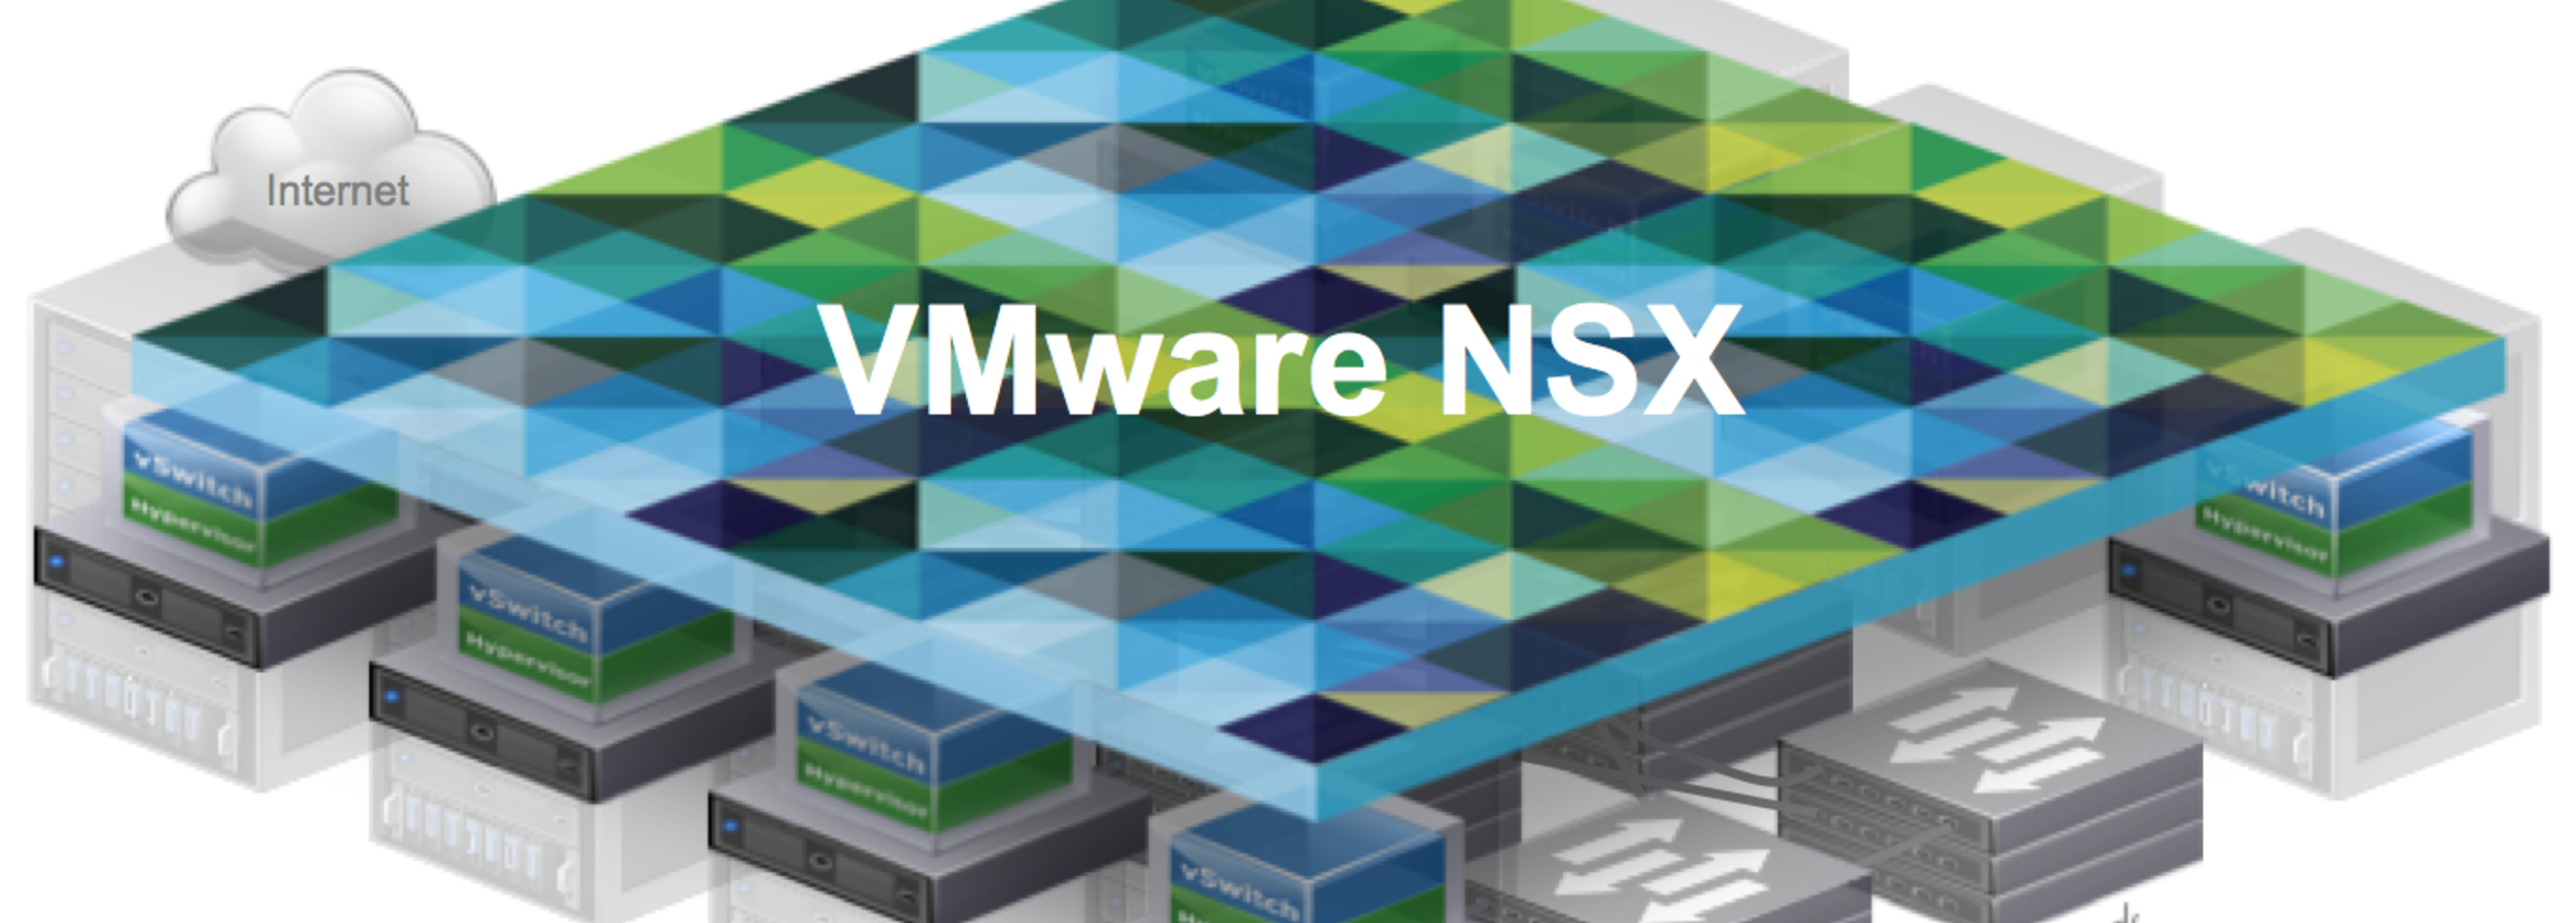 Formation troubleshooting VMware NSX